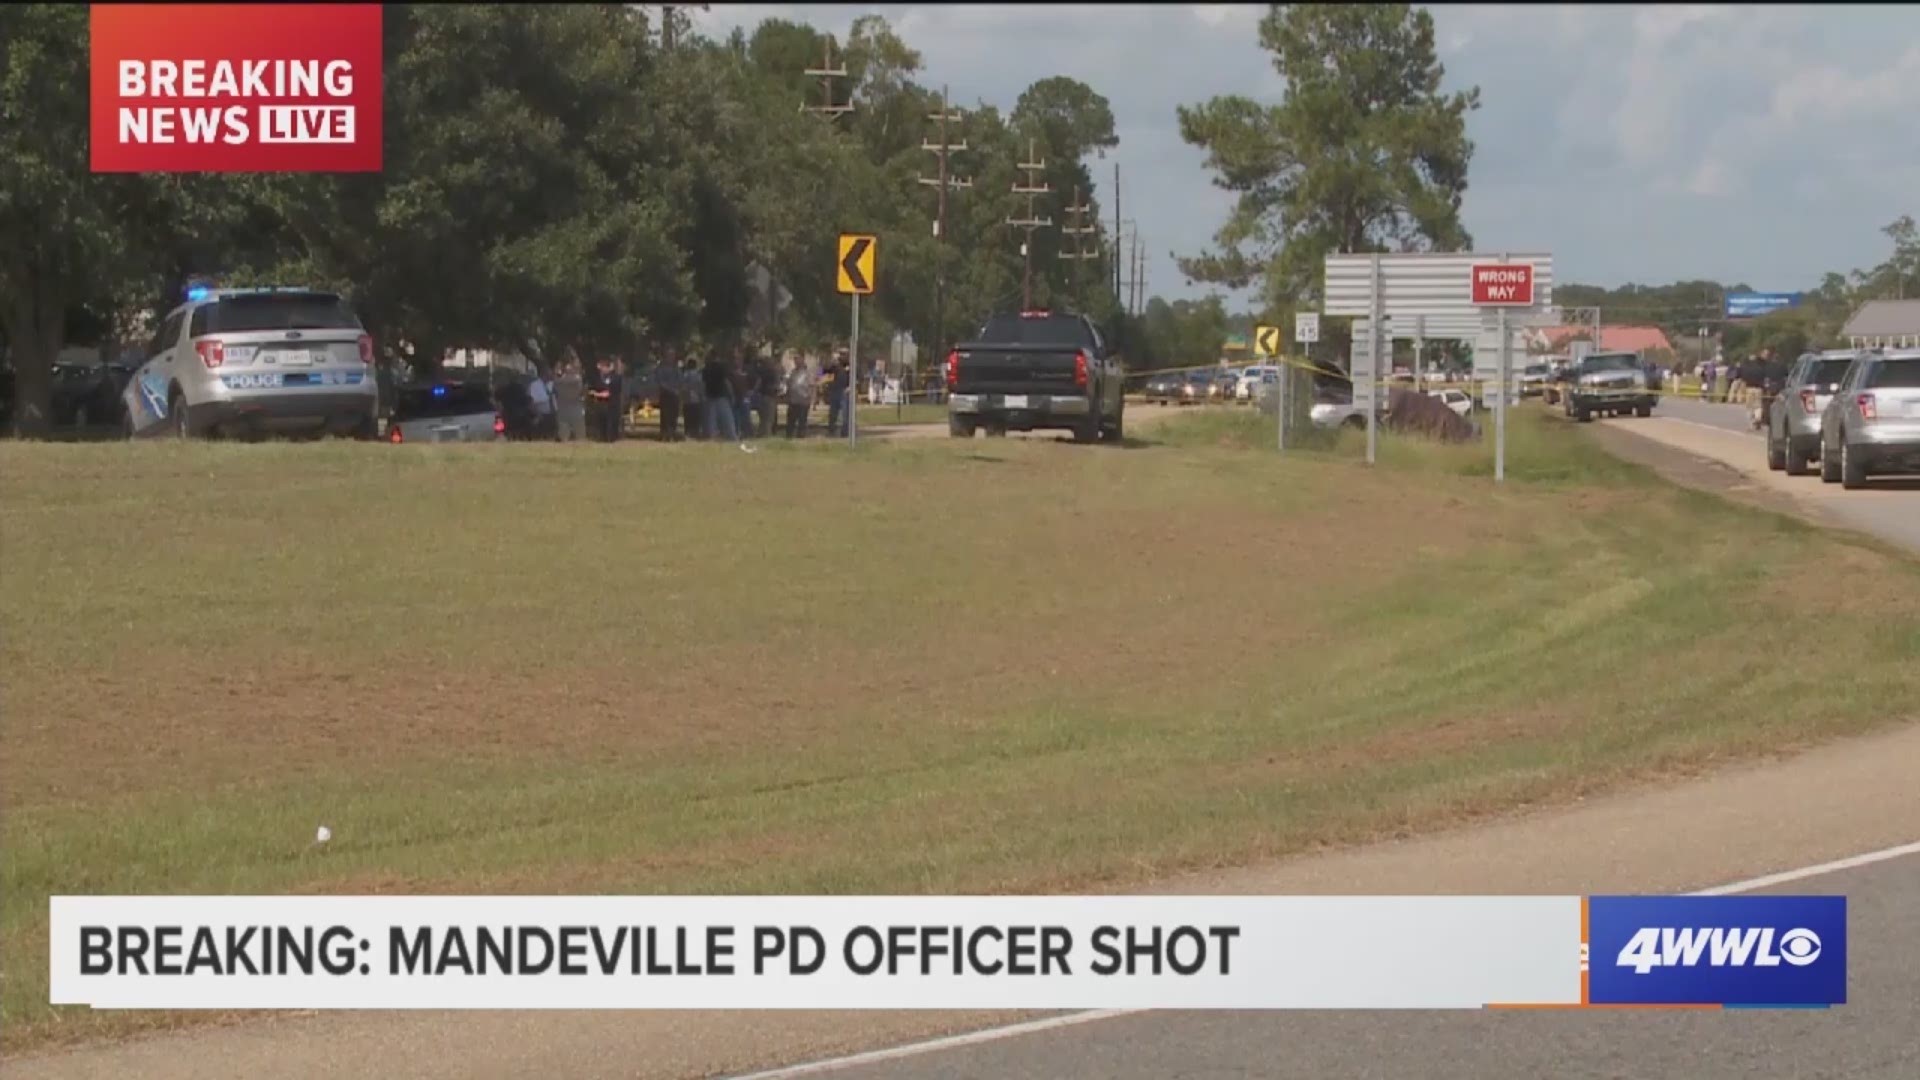 A Mandeville police officer was shot Friday afternoon, police officials confirmed to WWL-TV.